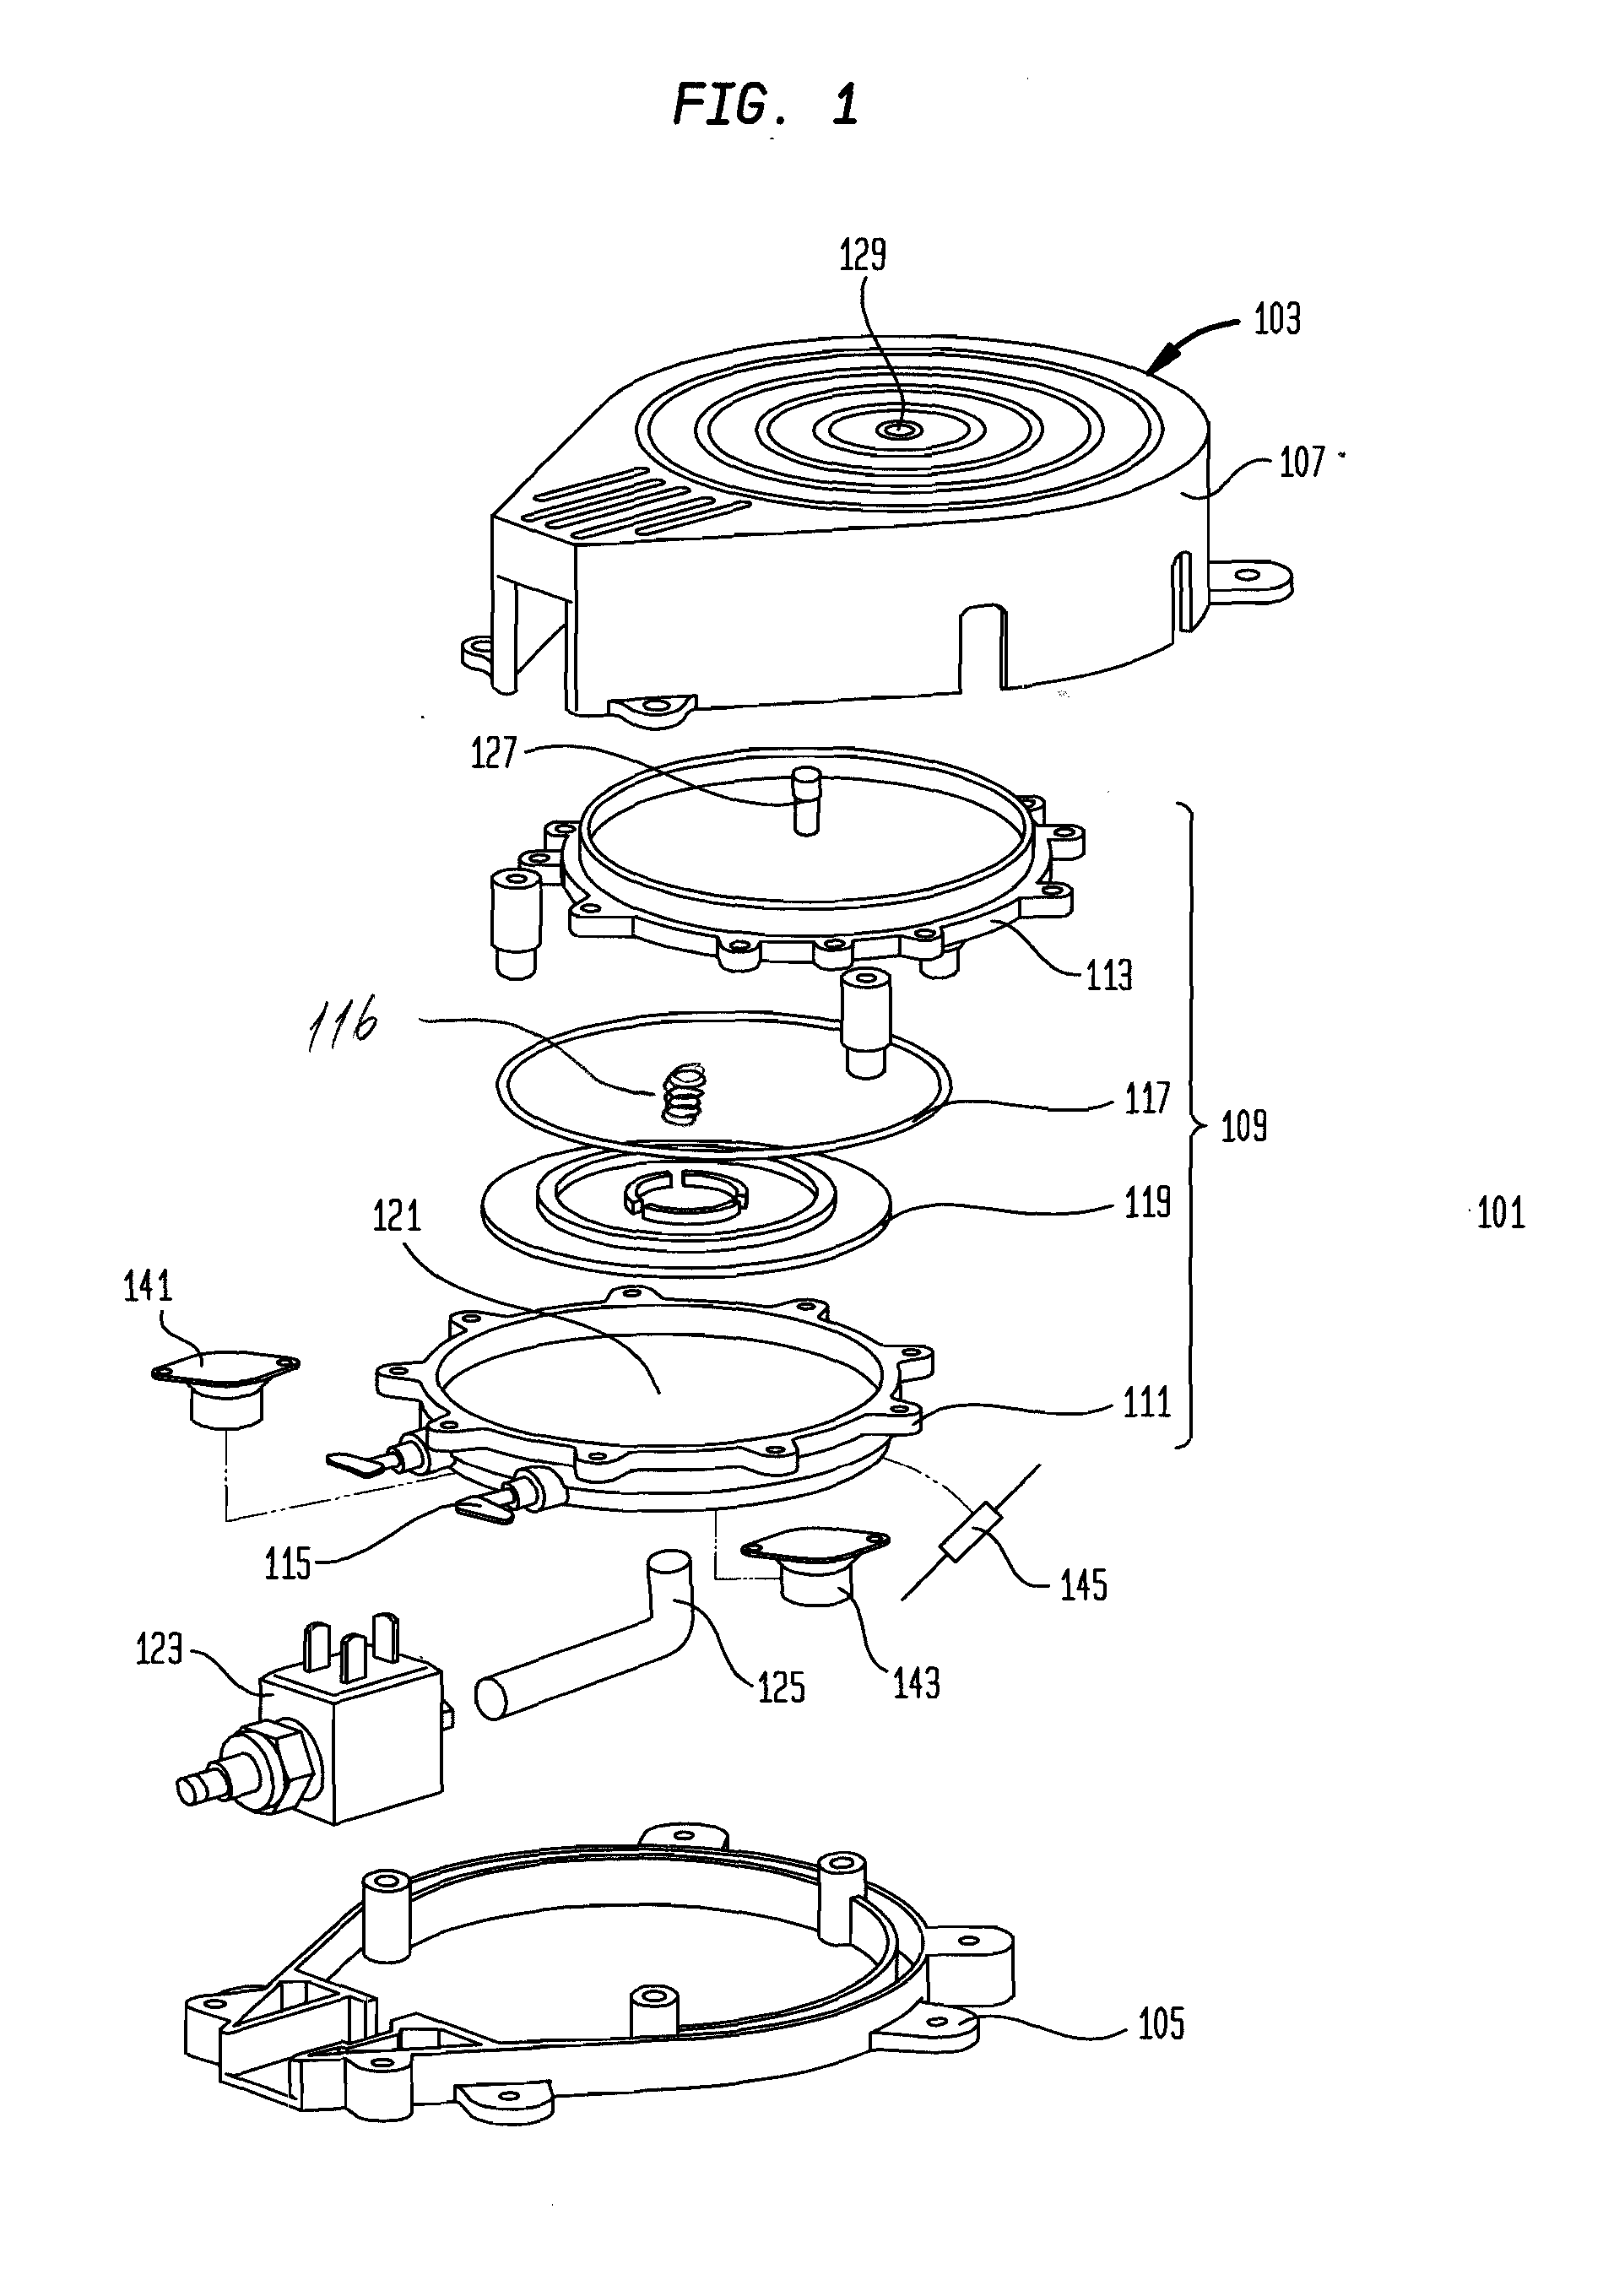 Steam system for continuous cleaning of hood fans